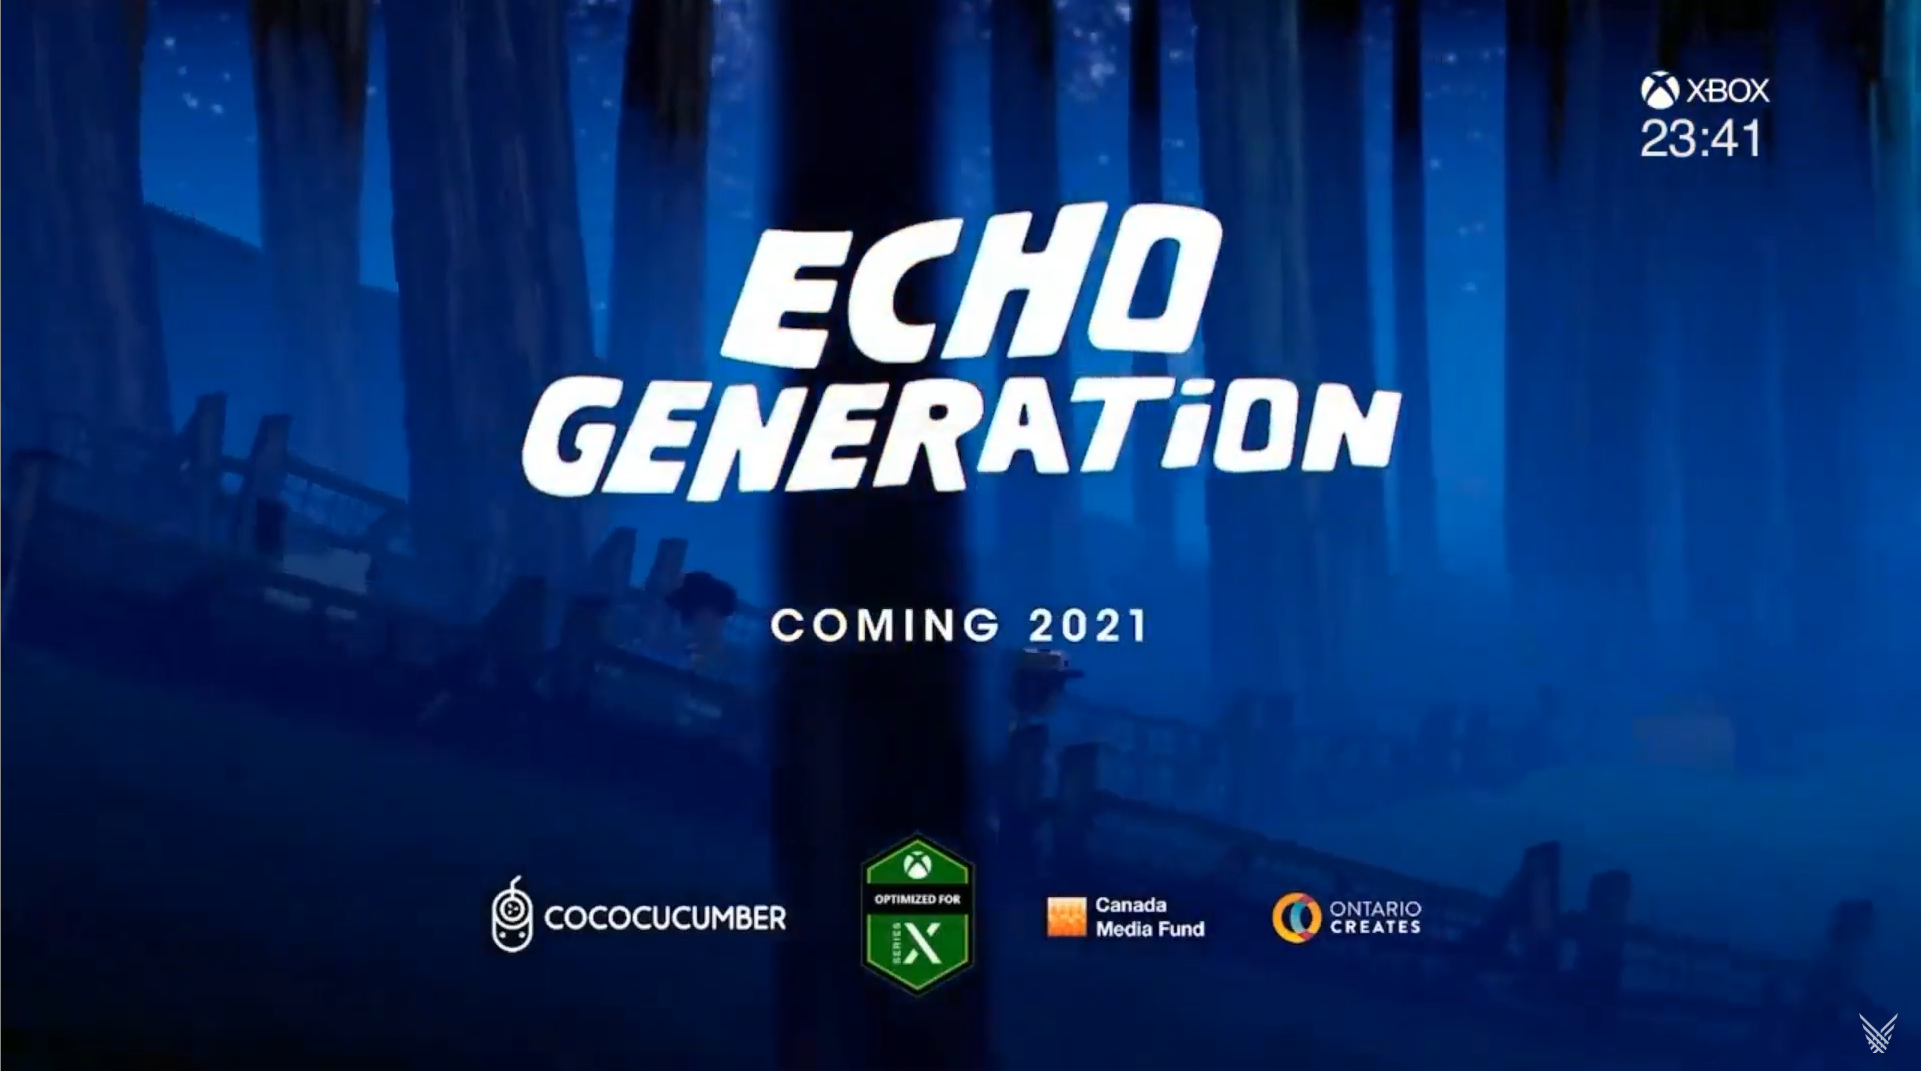 Echo Generation Announced, Coming 2021